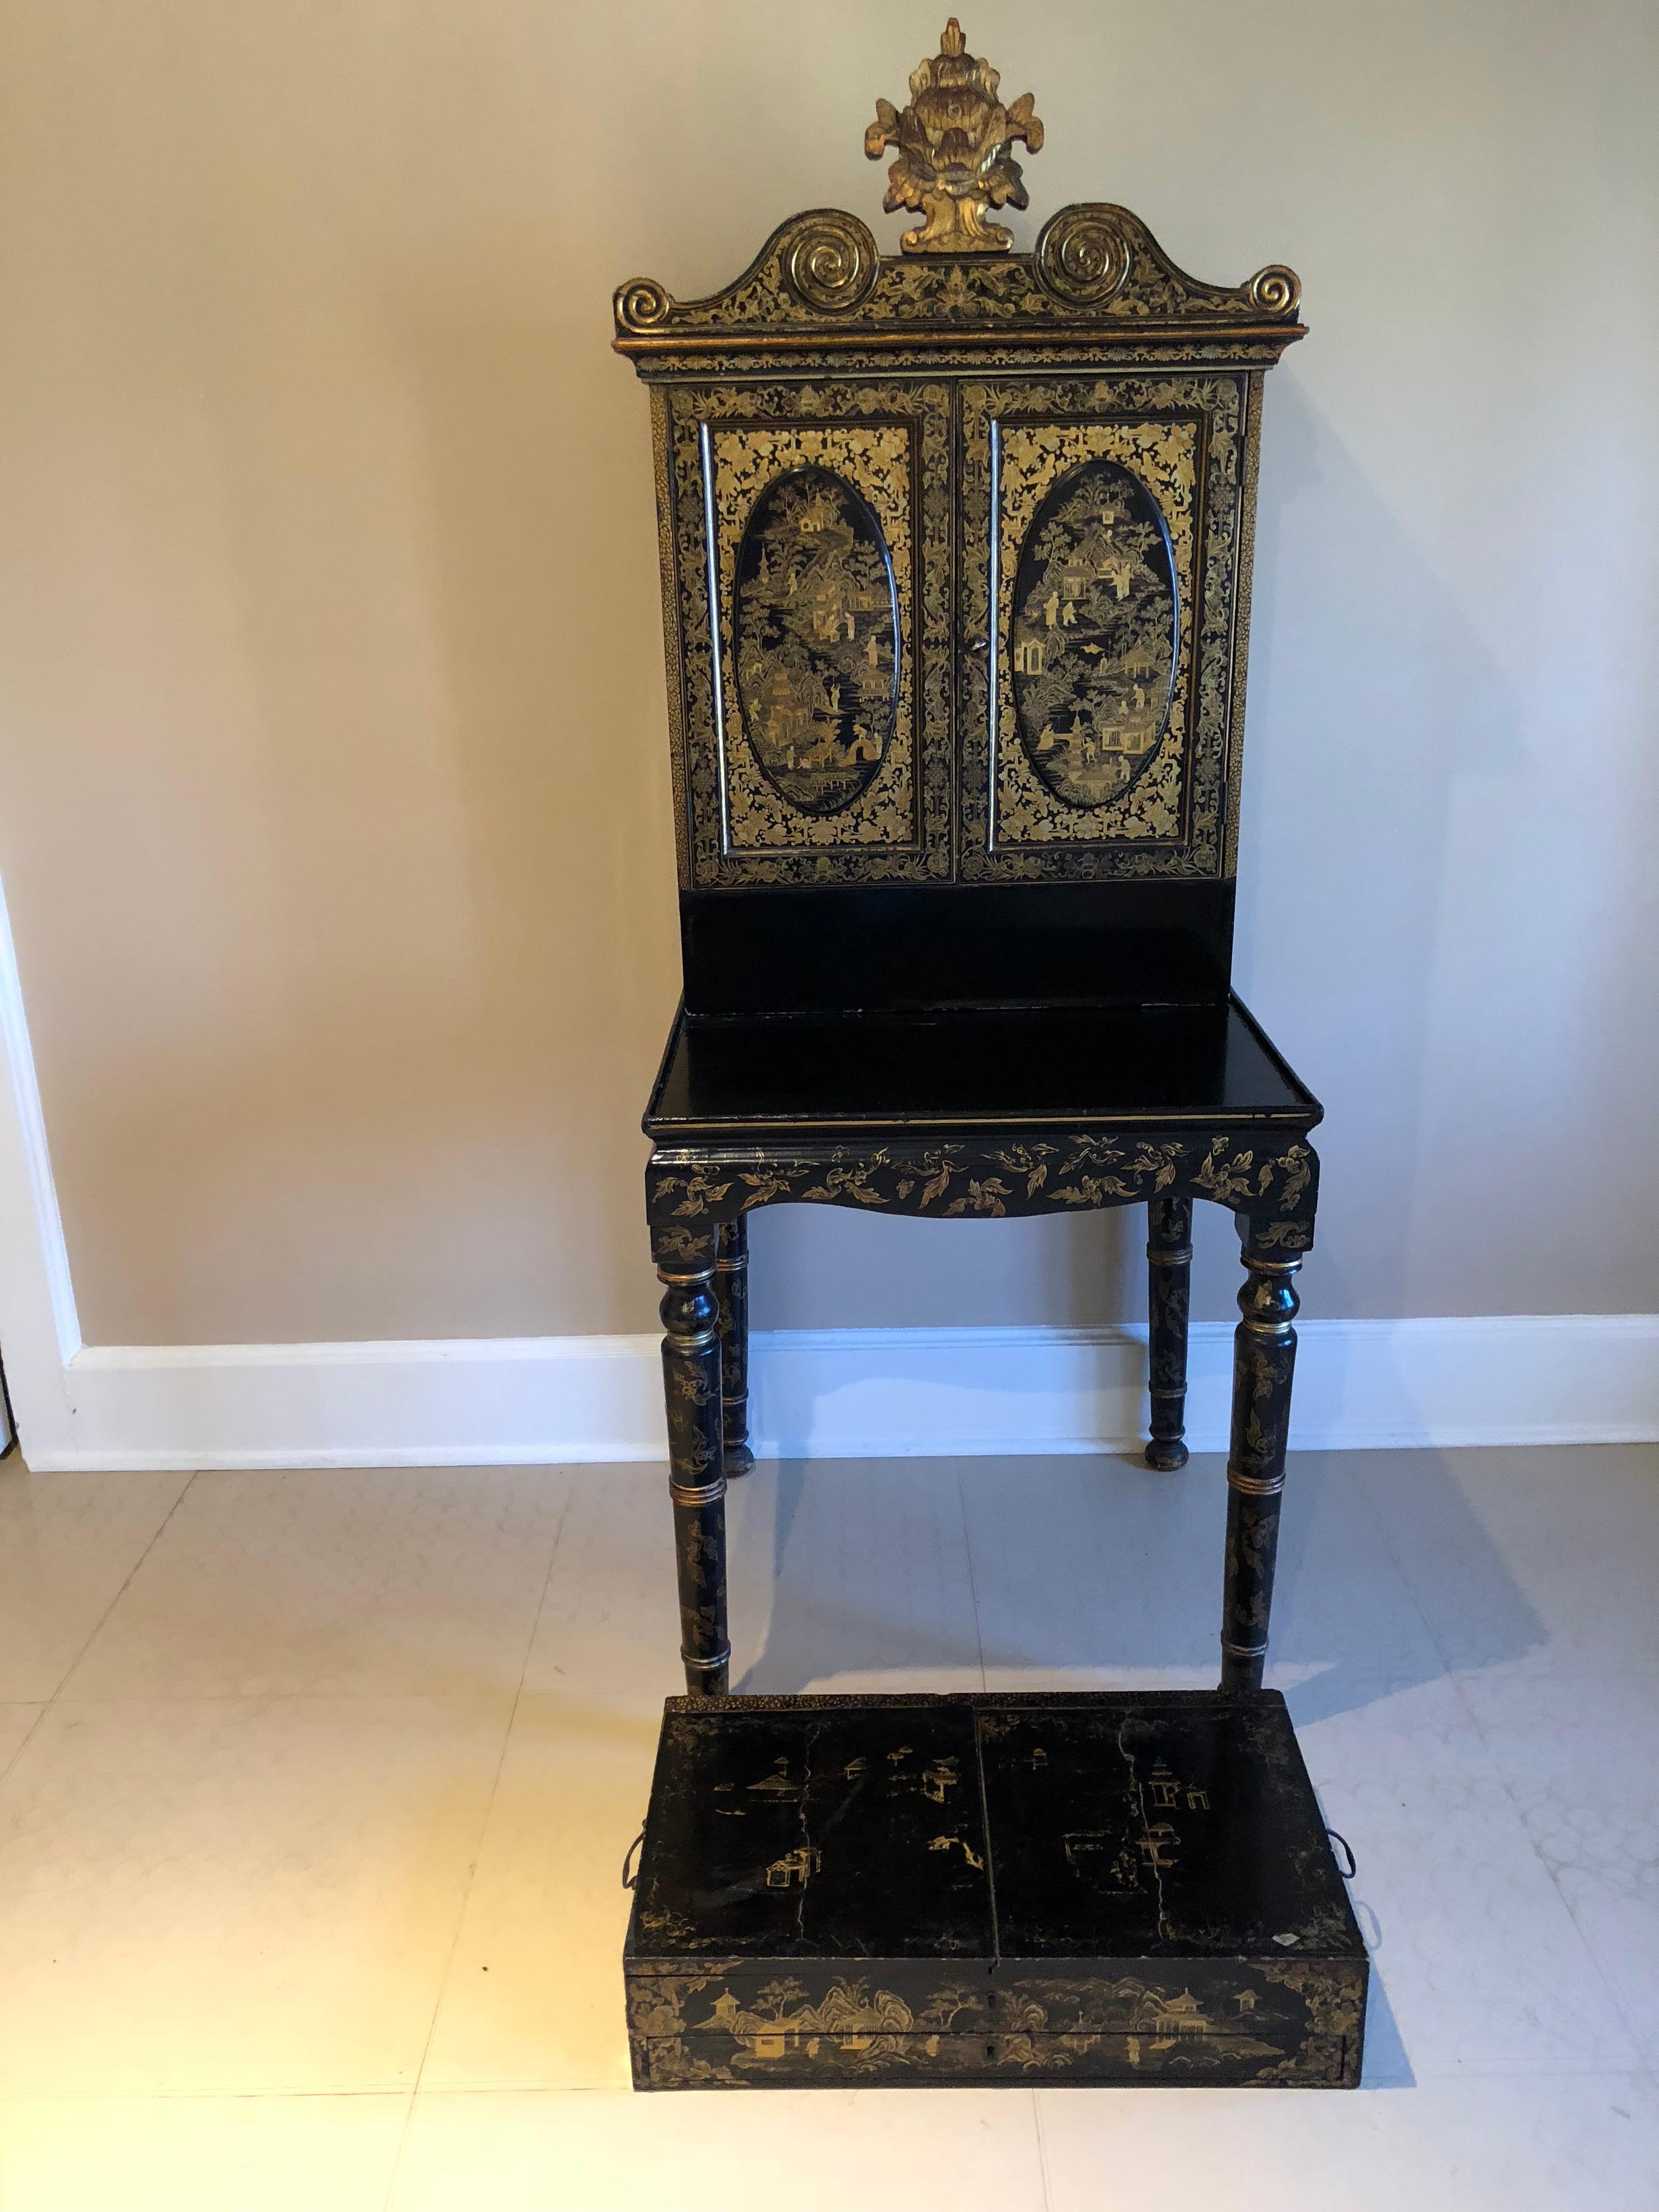 19th Century Exquisite Antique Chinese Export Gilt Decorated Black Lacquer Cabinet on Stand